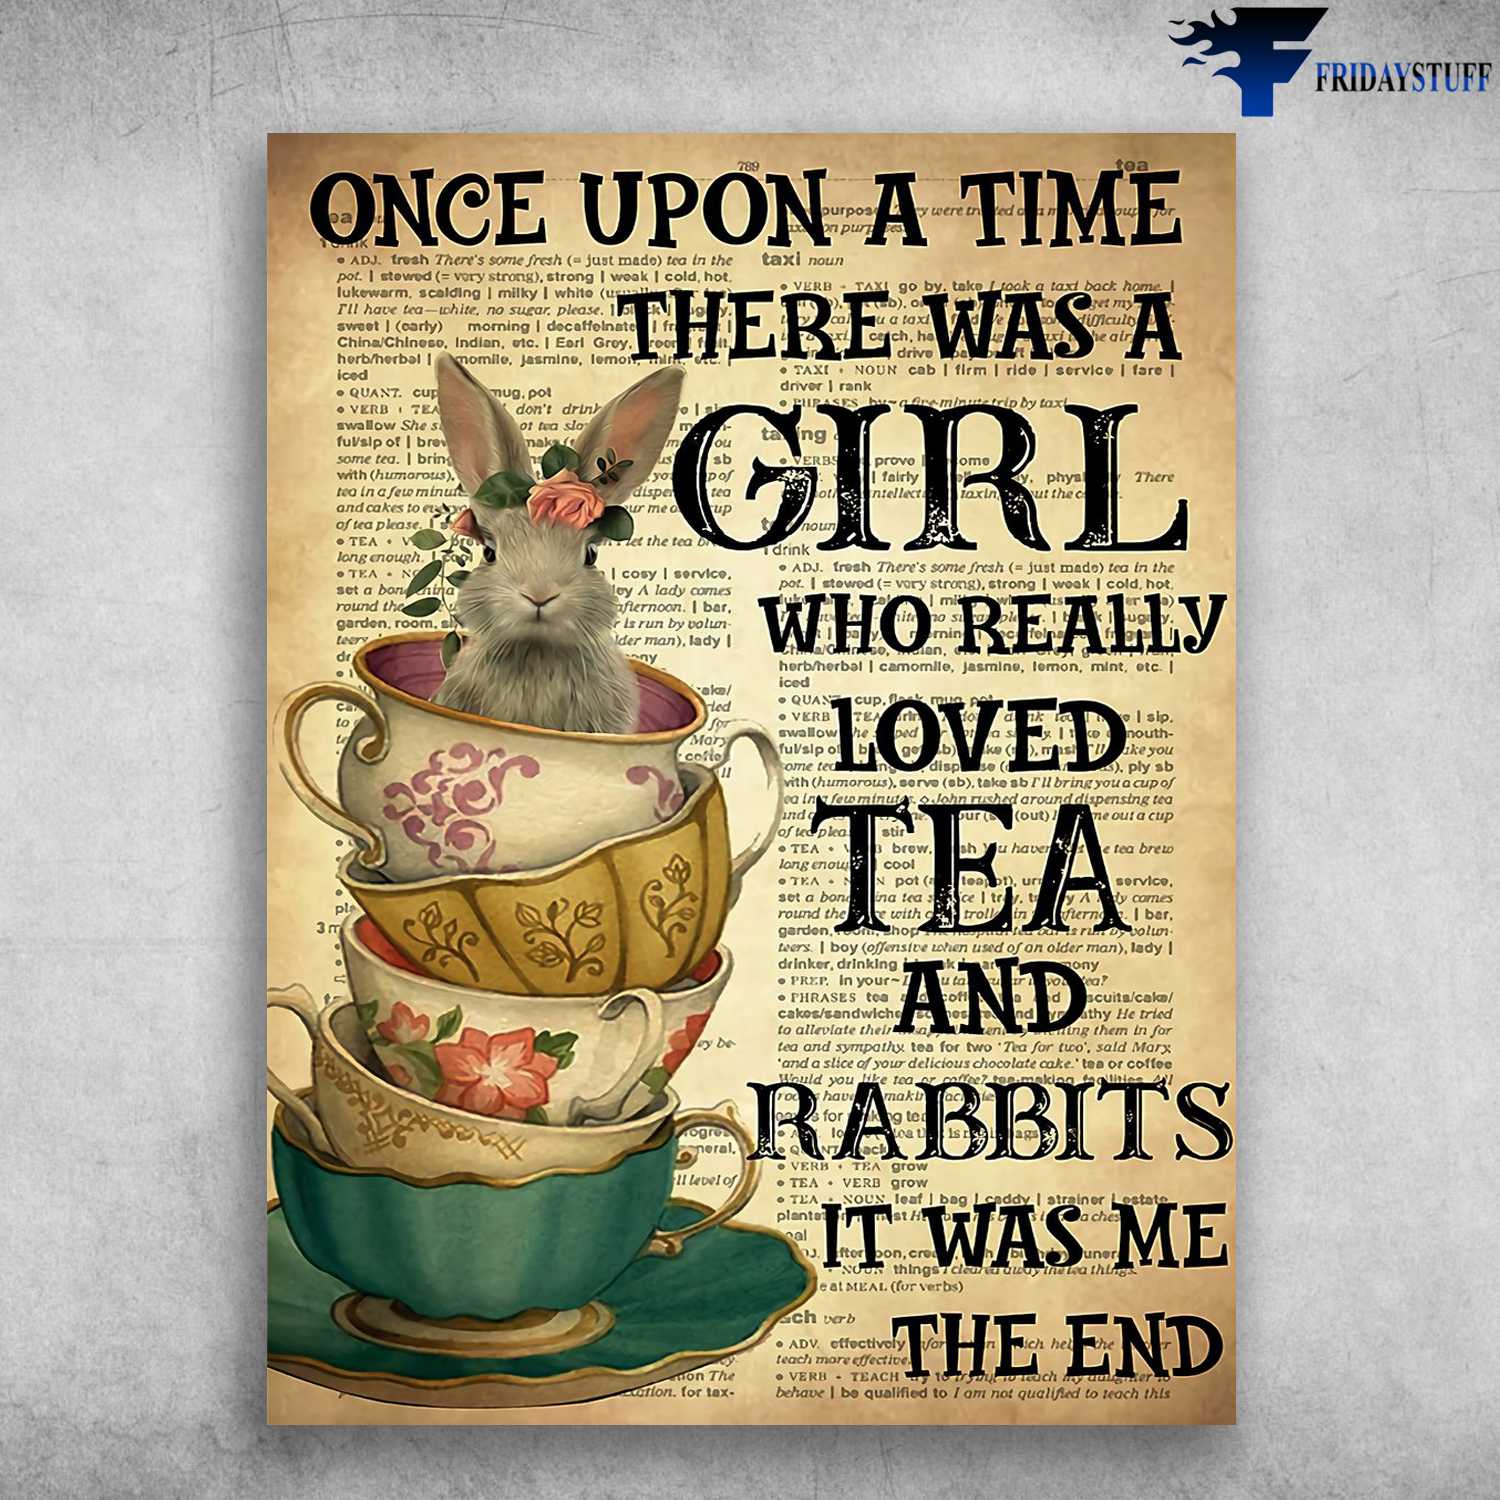 Rabbit And Tea, Rabbit Poster - Once Upon A Time, There Was A Girl, Who Really Loved Tea And Rabbit, It Was Me, The End